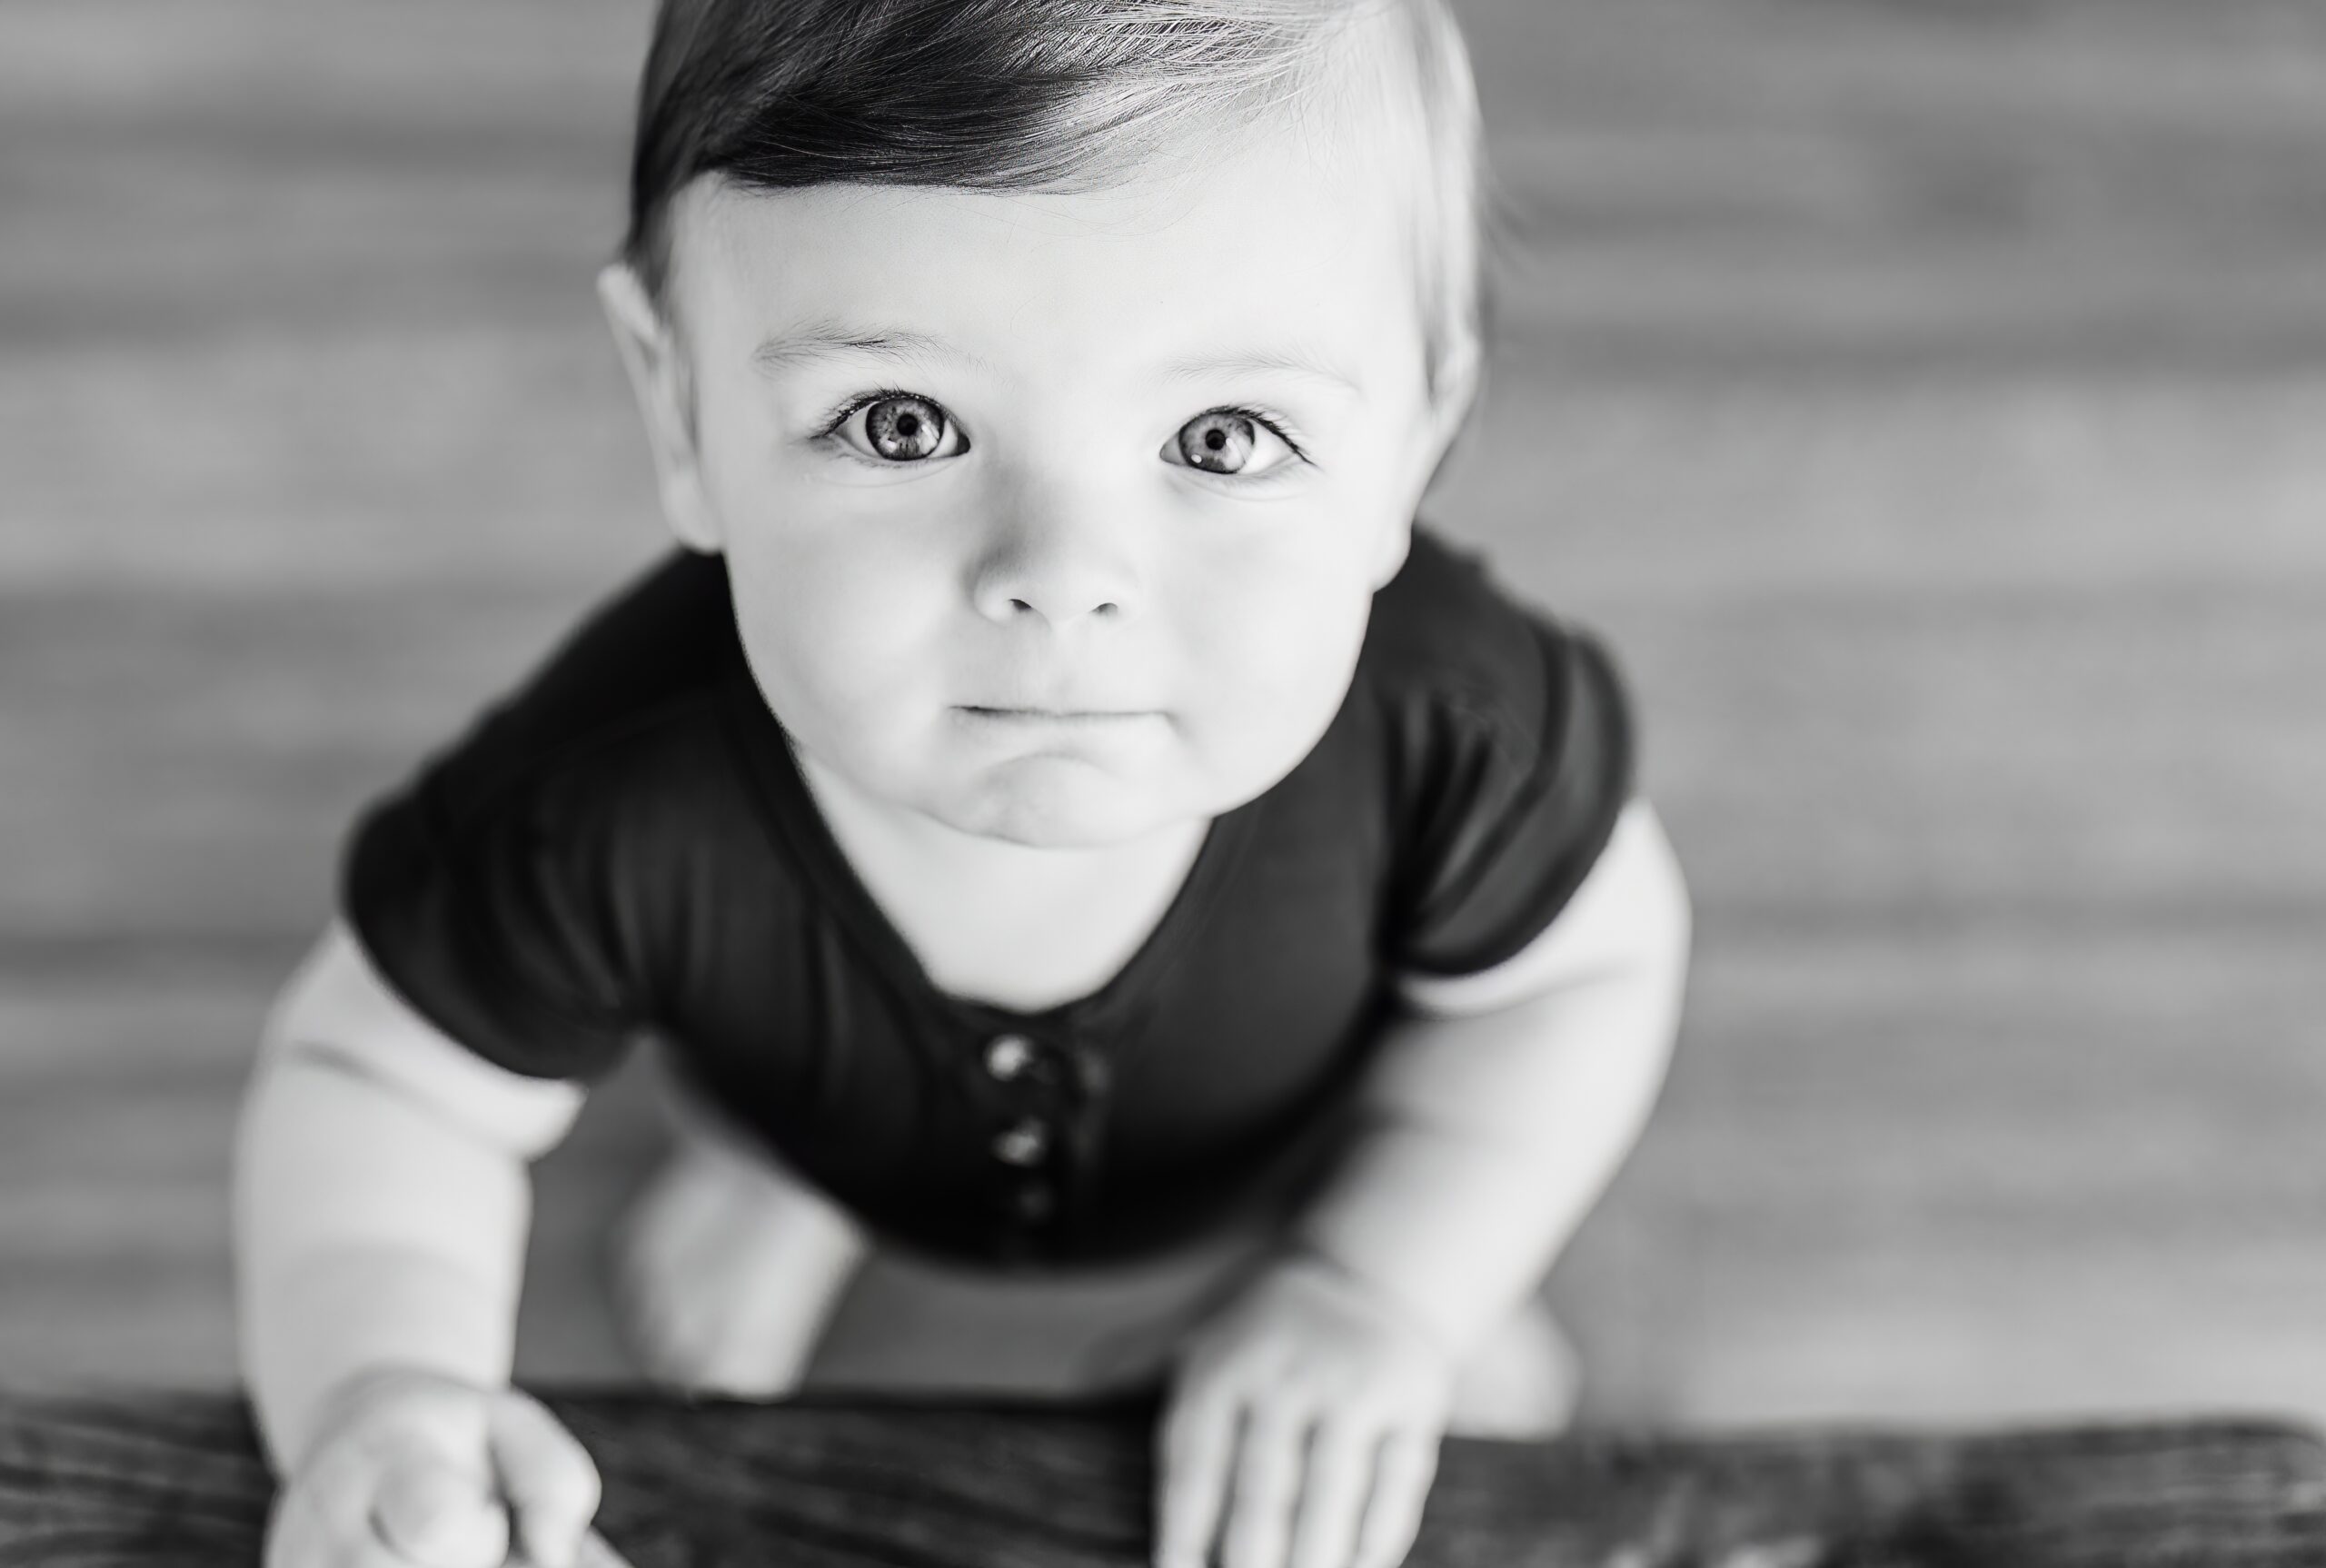 Black and white portrait of a one year old boy looking up at the camera.